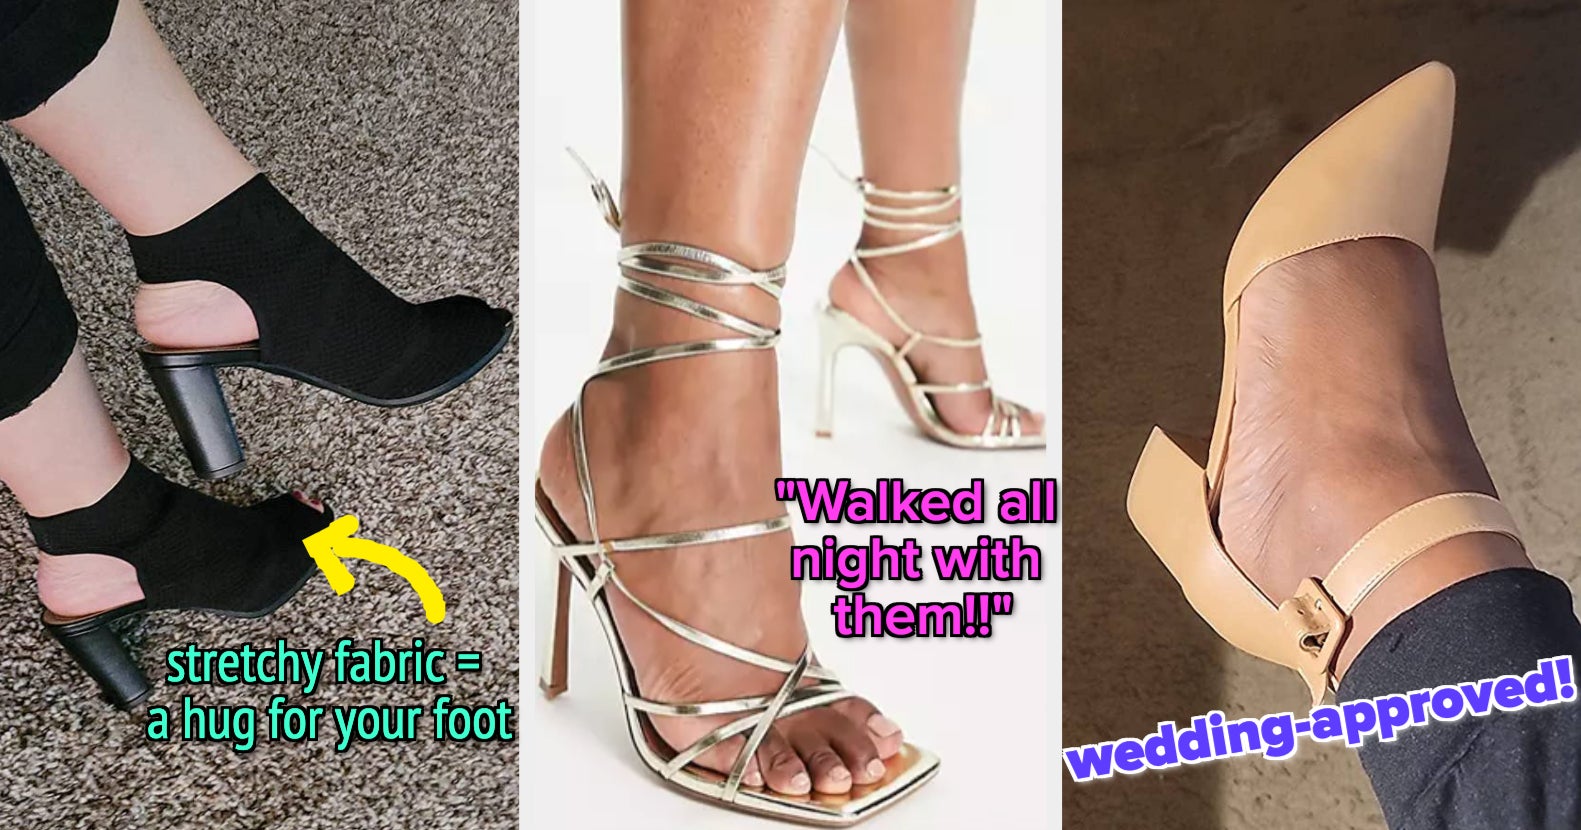 16 Best Heels For Wide Feet That Reviewers Love